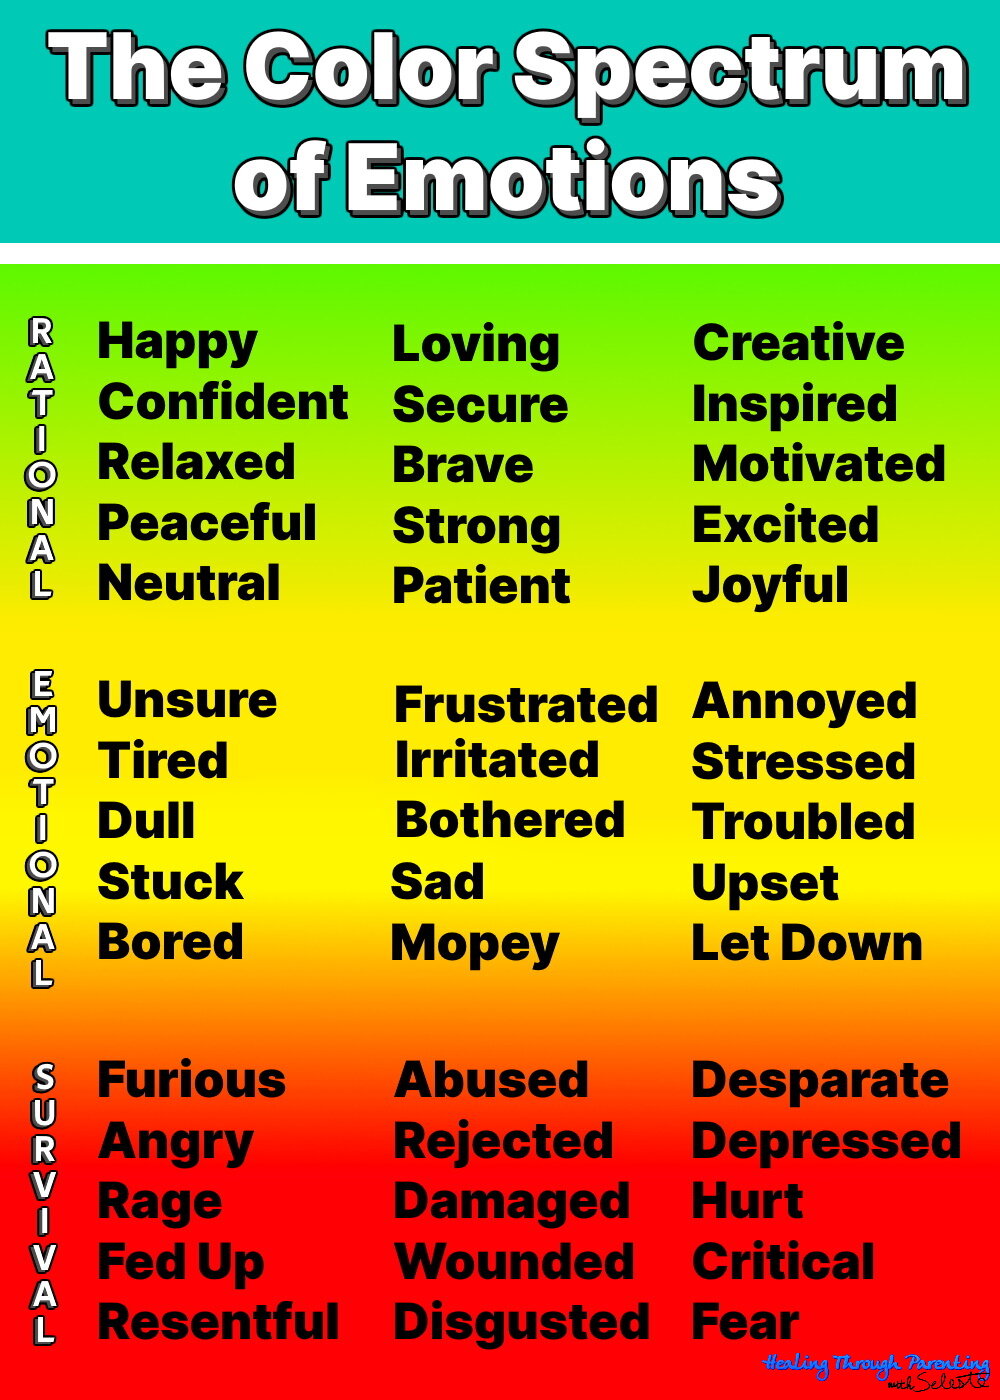 Color and emotions: How Color Impacts Emotions and Behaviors